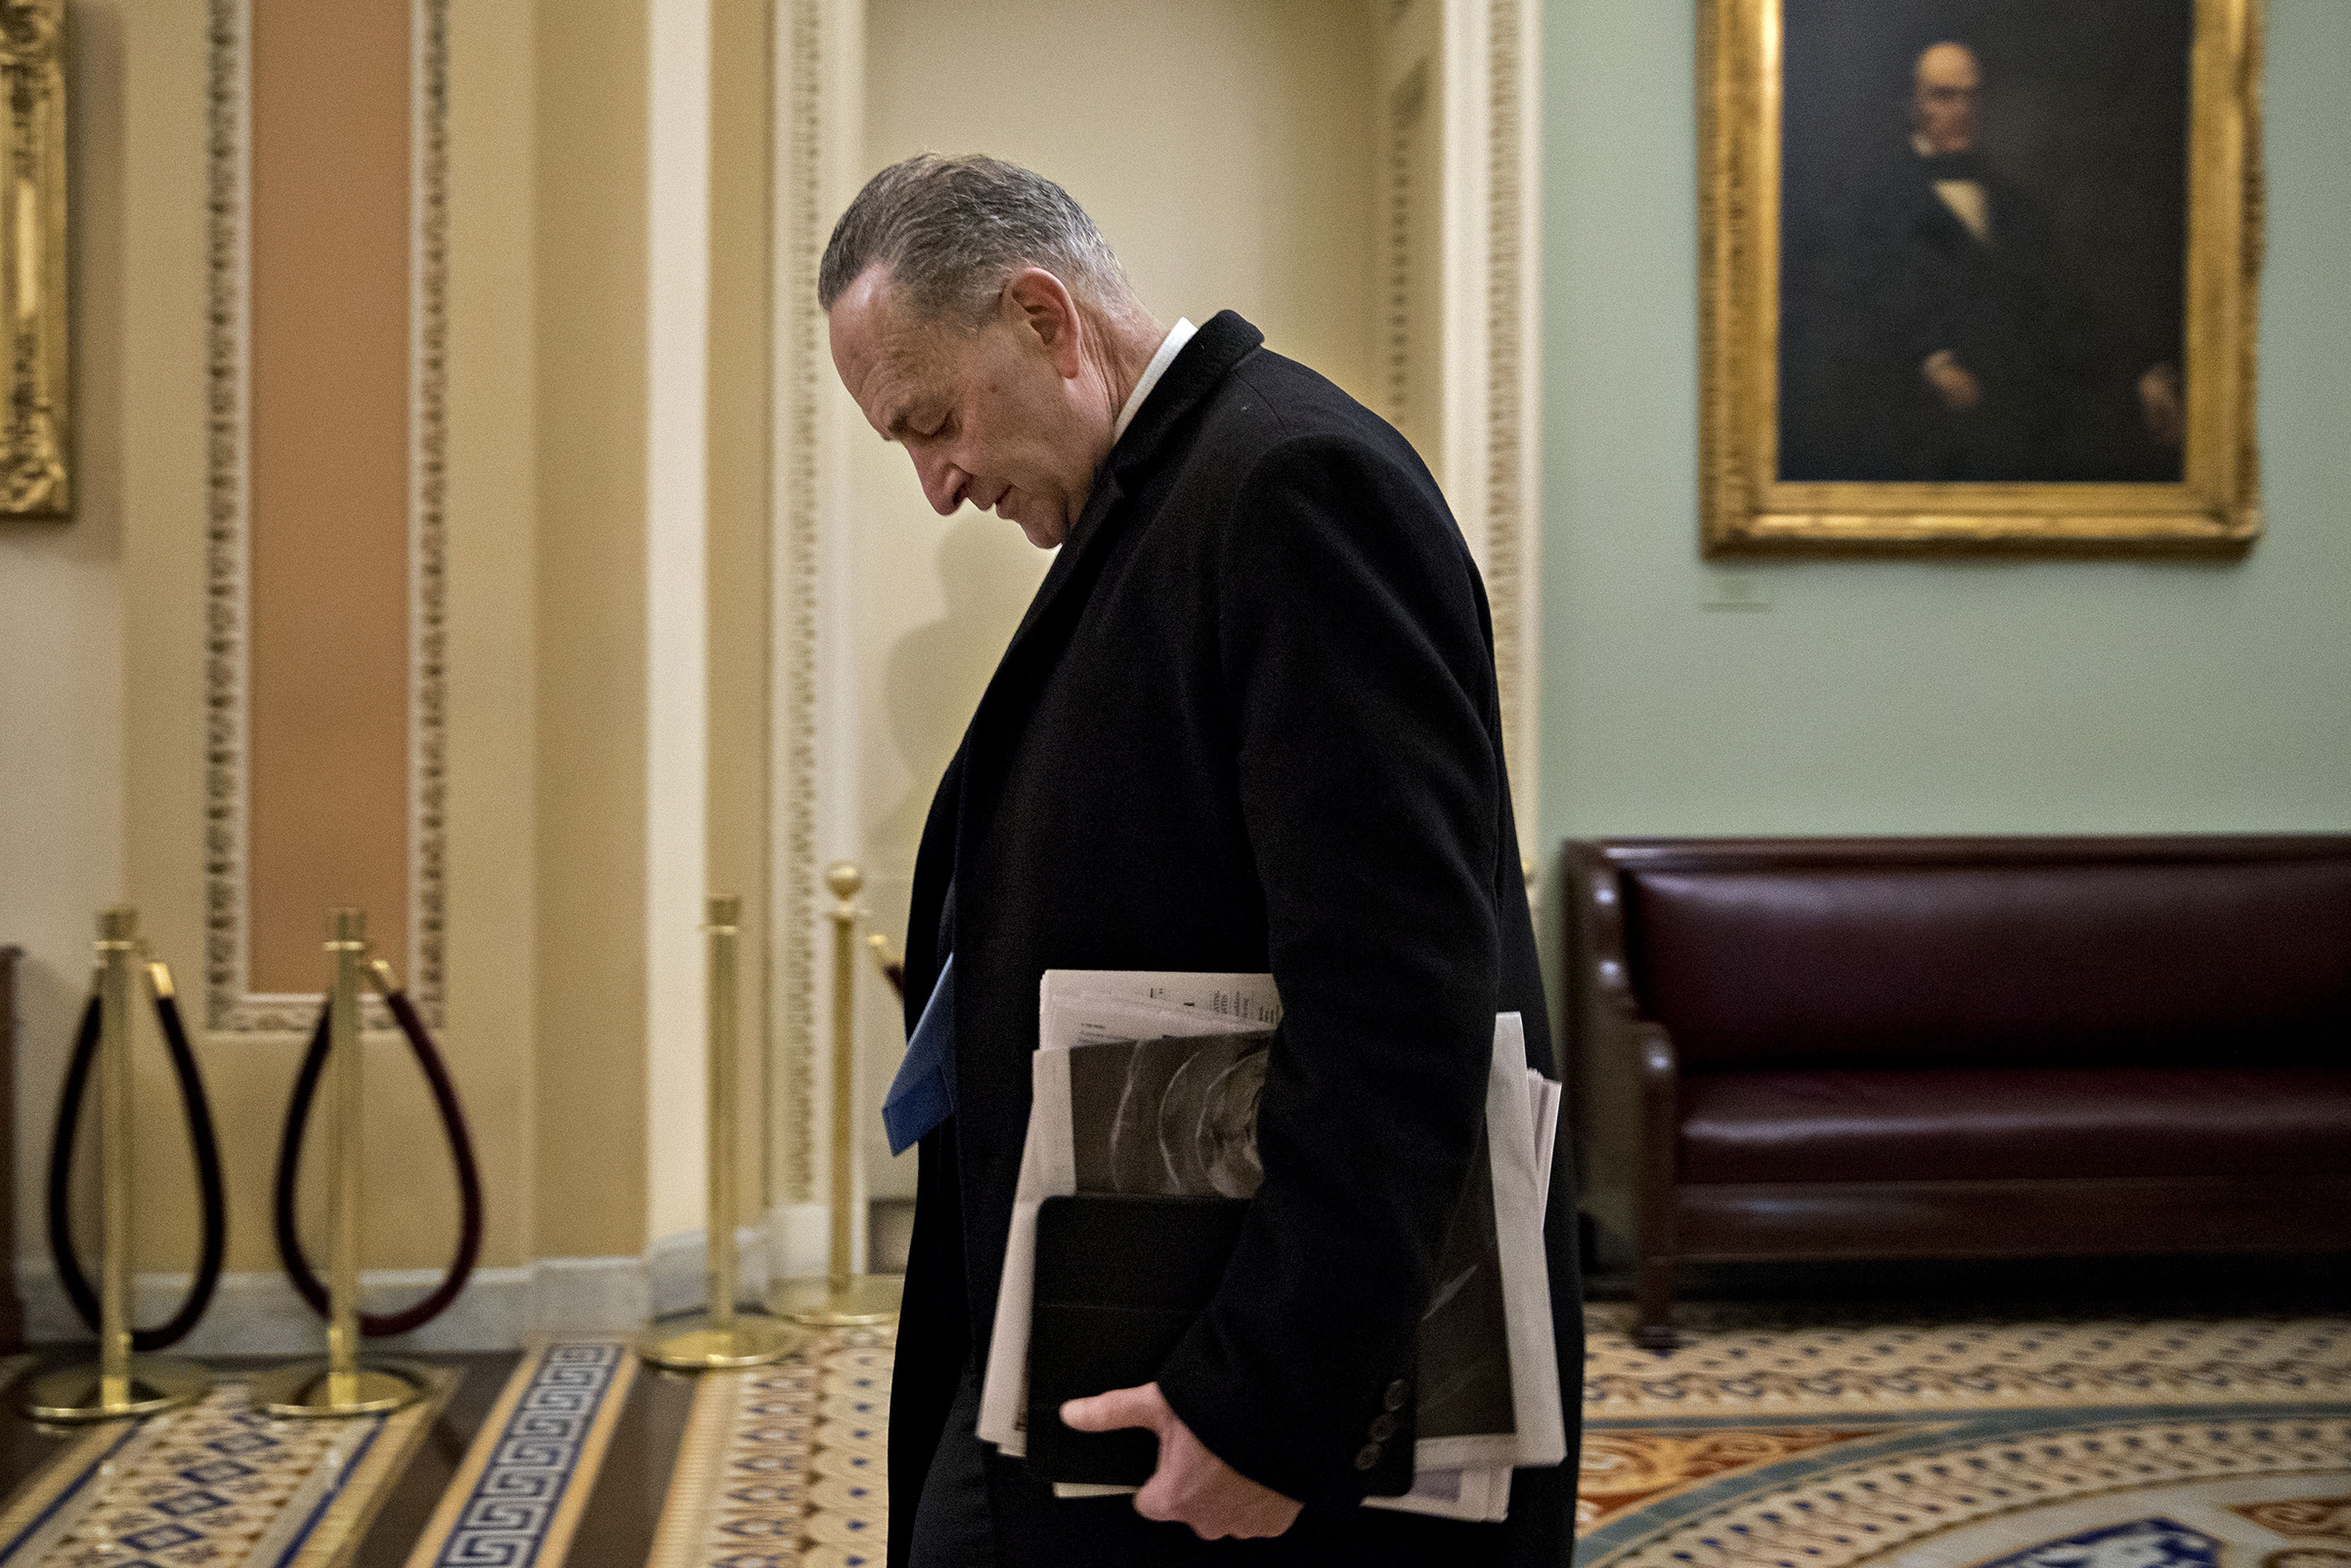 Much of the Democratic base’s anger is aimed at the Senate minority leader, Chuck Schumer of New York (Andrew Harrer—Bloomberg/Getty Images)